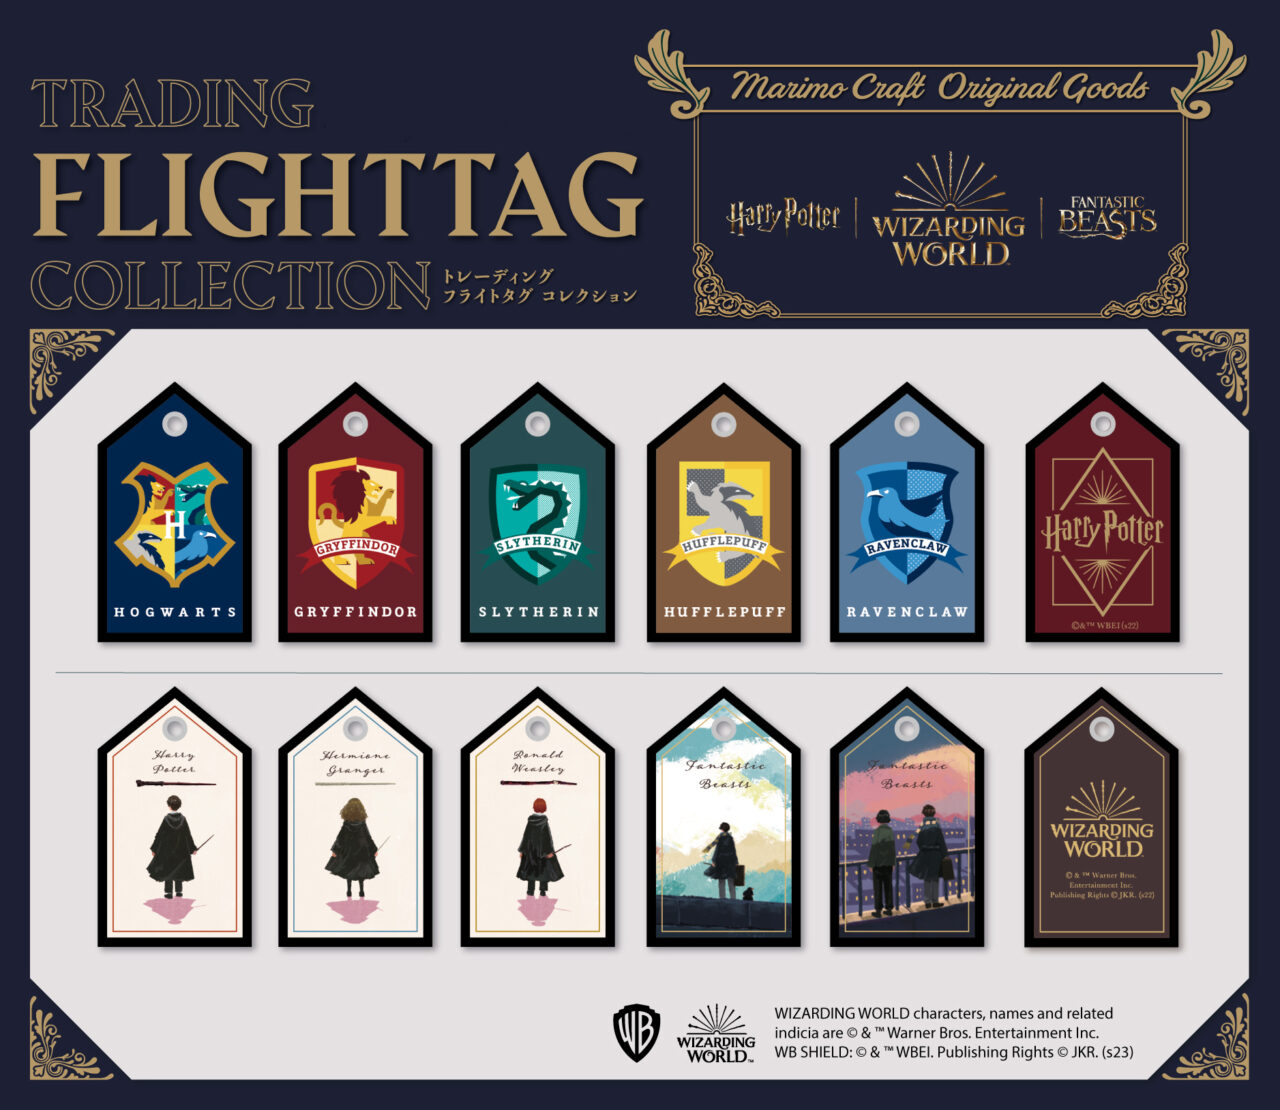 Harry Potter and Fantastic Beasts and Where to Find Them trading flight tag collections on sale early Jan 2023 Marimo Craft